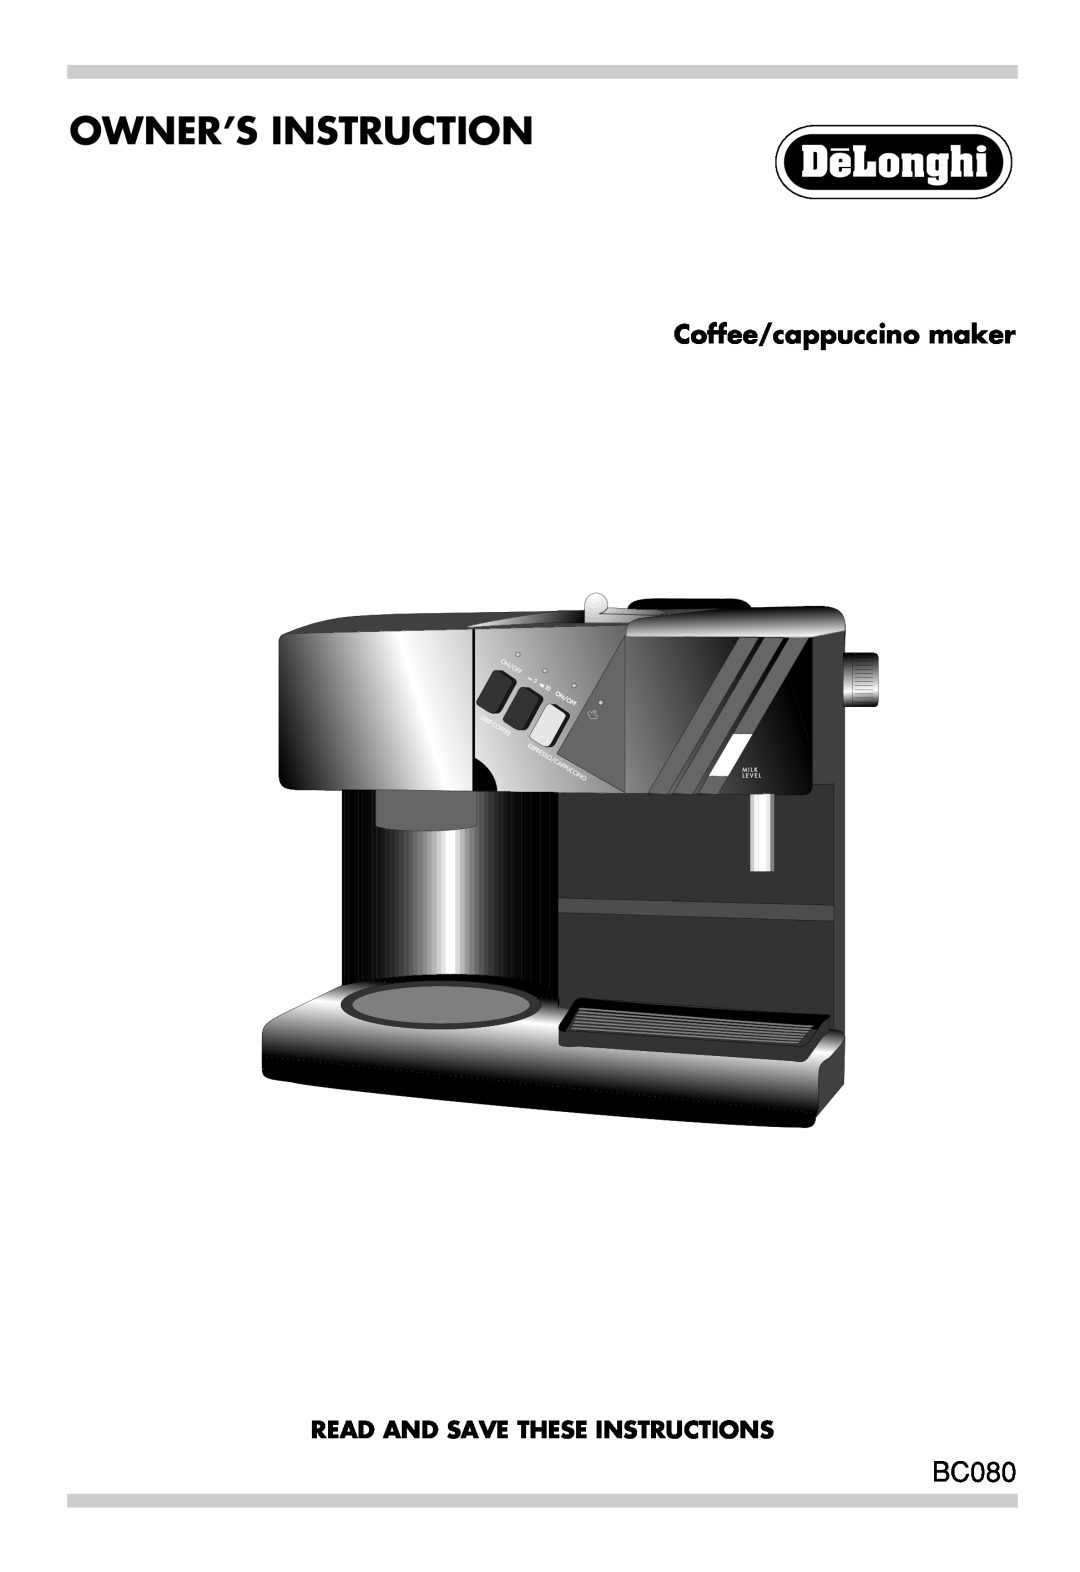 DeLonghi BCO80 manual Owner’S Instruction, BC080, Coffee/cappuccino maker, Read And Save These Instructions 